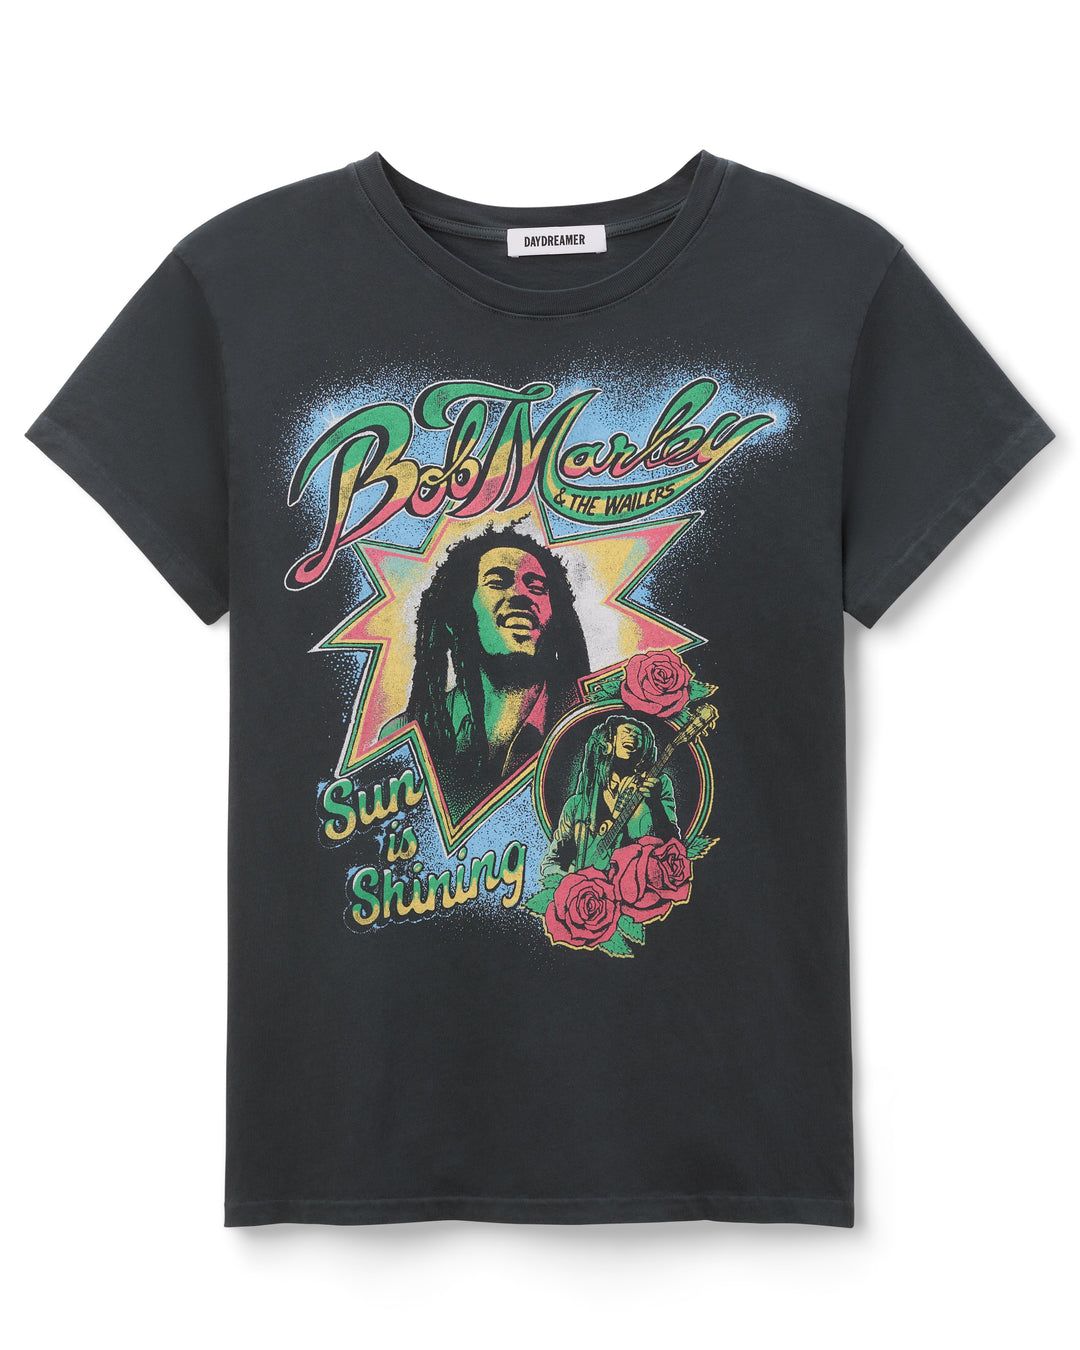 BOB MARLEY AND THE WAILERS SUN IS SHINING TOUR TEE-VINTAGE BLACK - Kingfisher Road - Online Boutique